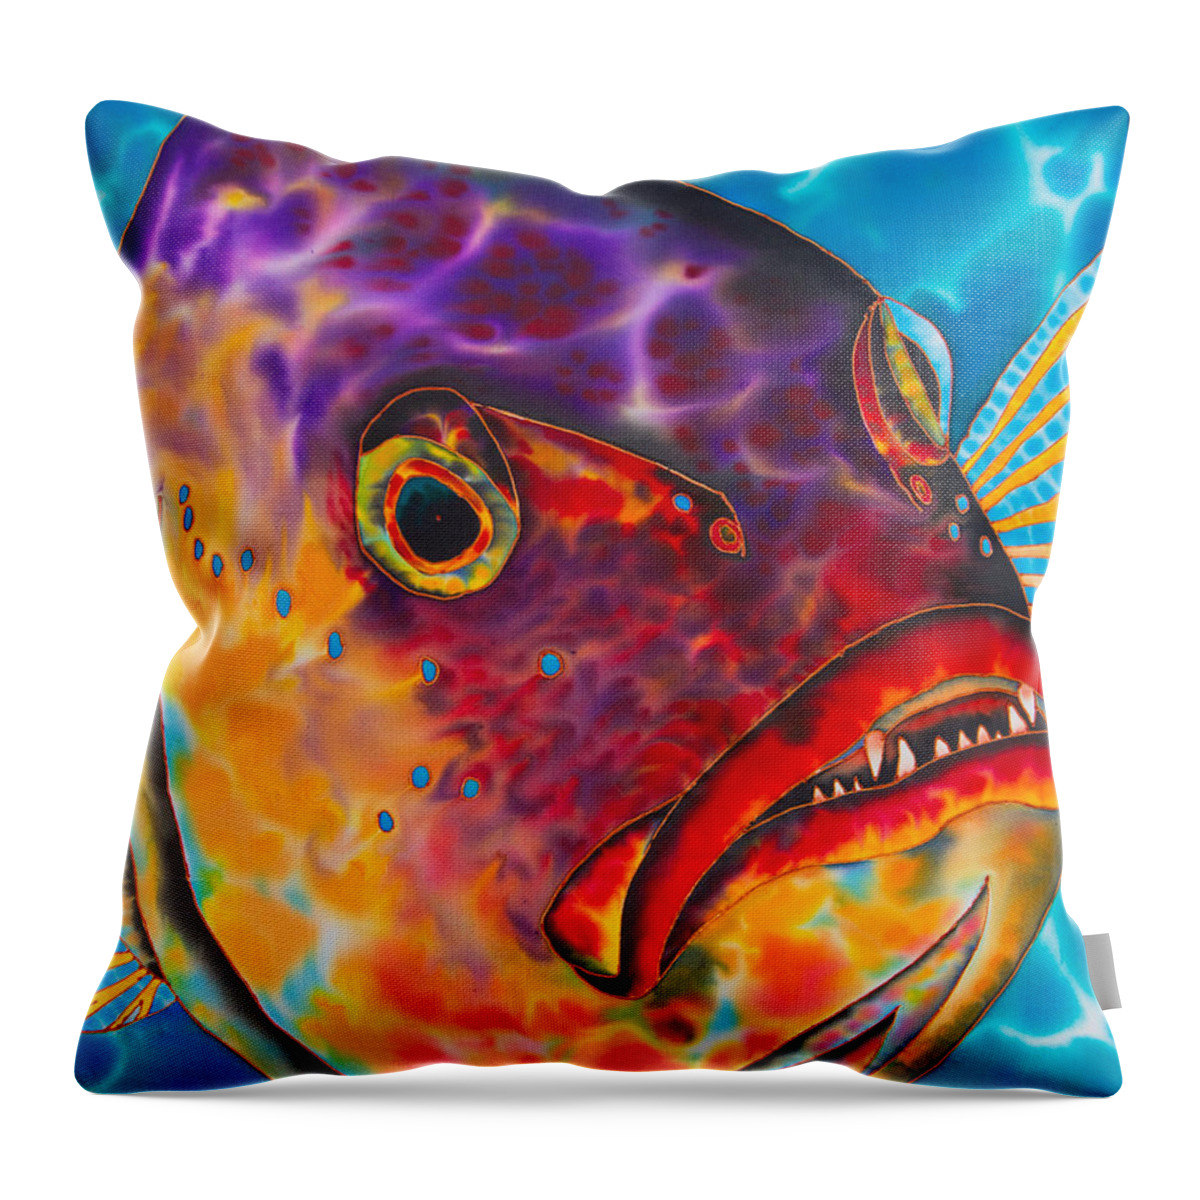 Dog Tooth Snapper Throw Pillow featuring the painting Dog Tooth Snapper by Daniel Jean-Baptiste